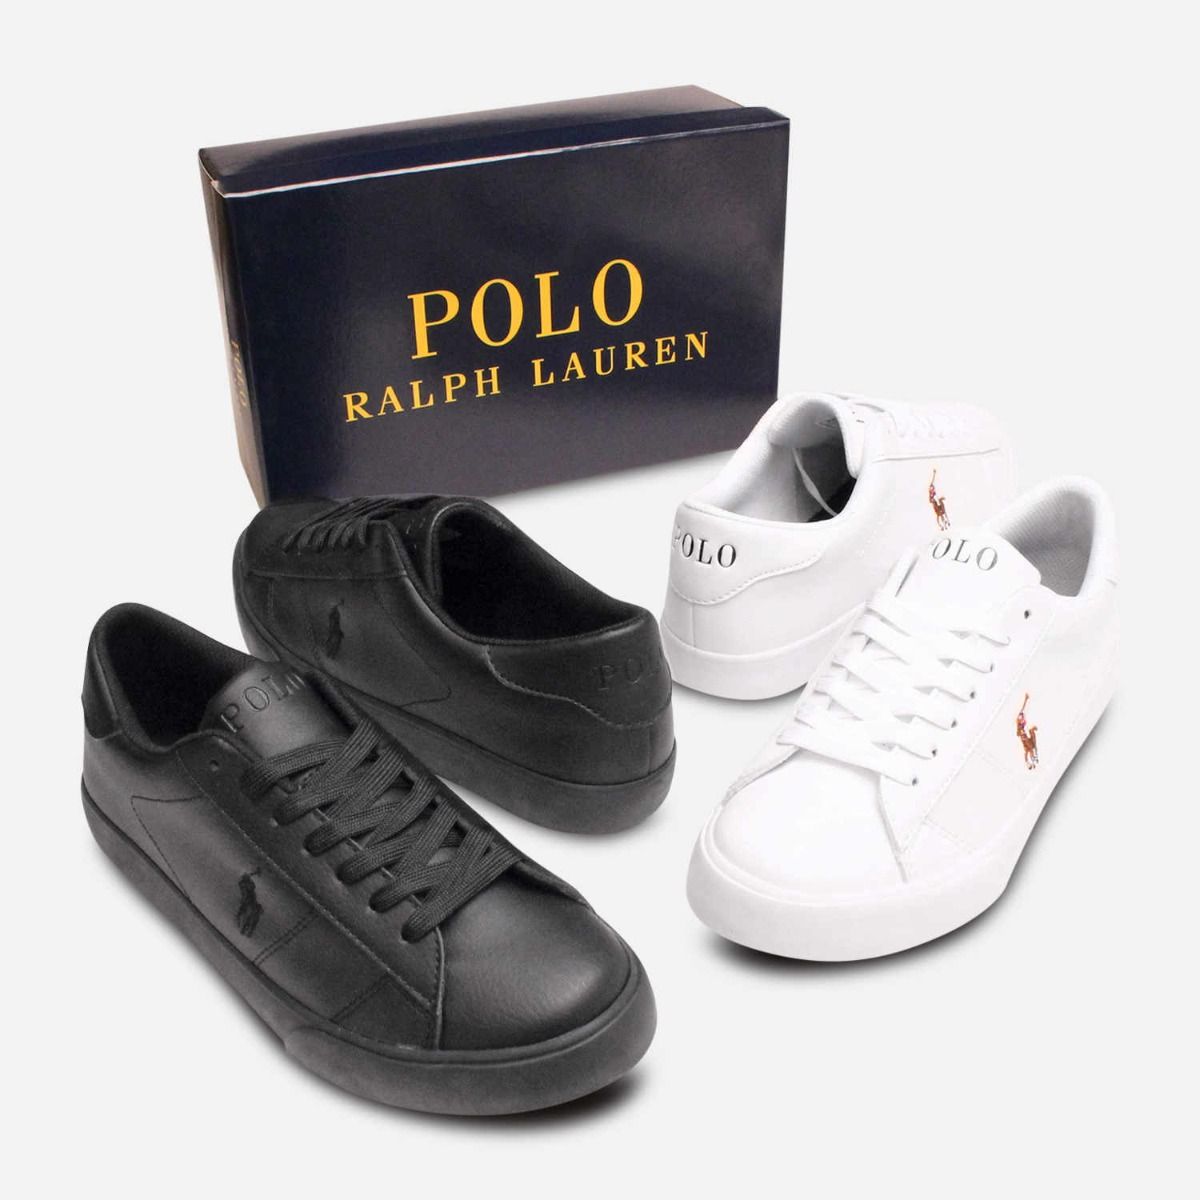 Southwest Pick up leaves twin Ralph Lauren Polo All Black Leather Smart Designer Shoes